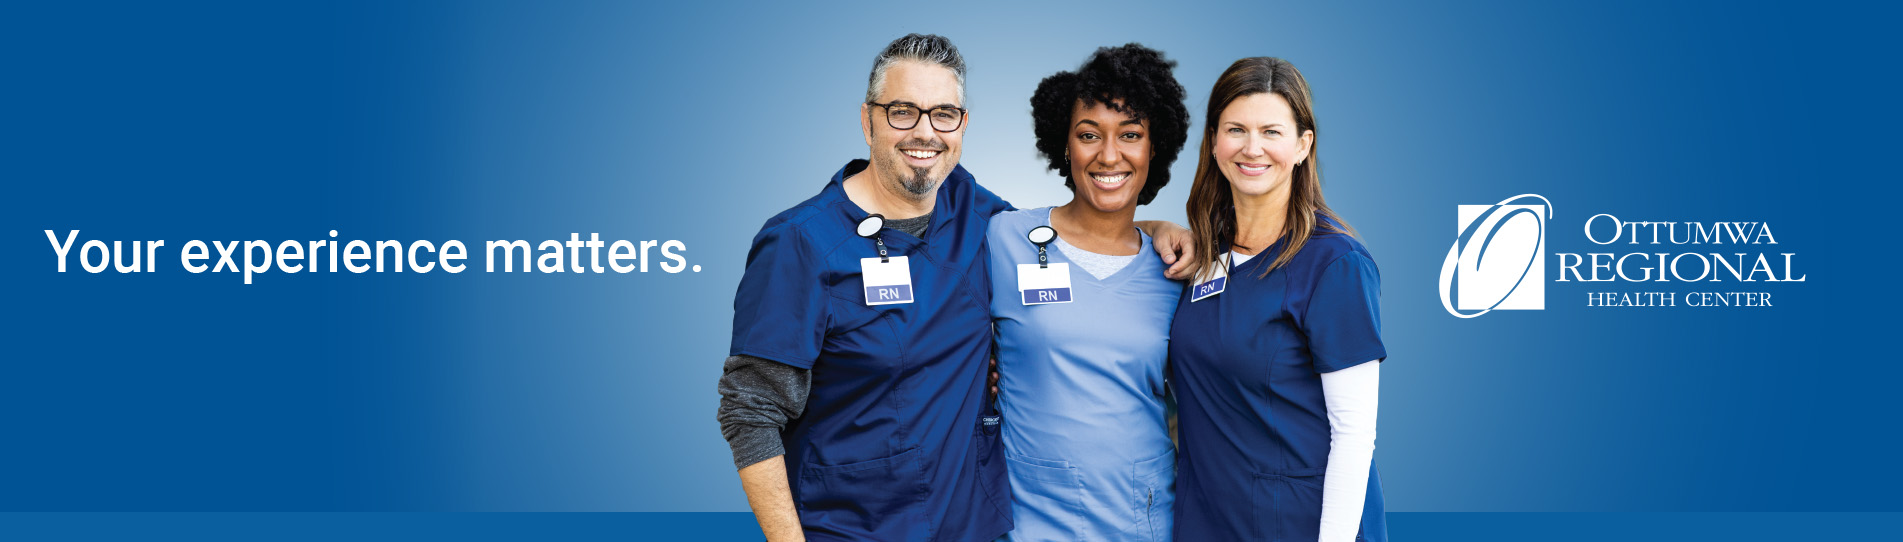 Banner graphic with image of nurses and text "your experience matters."